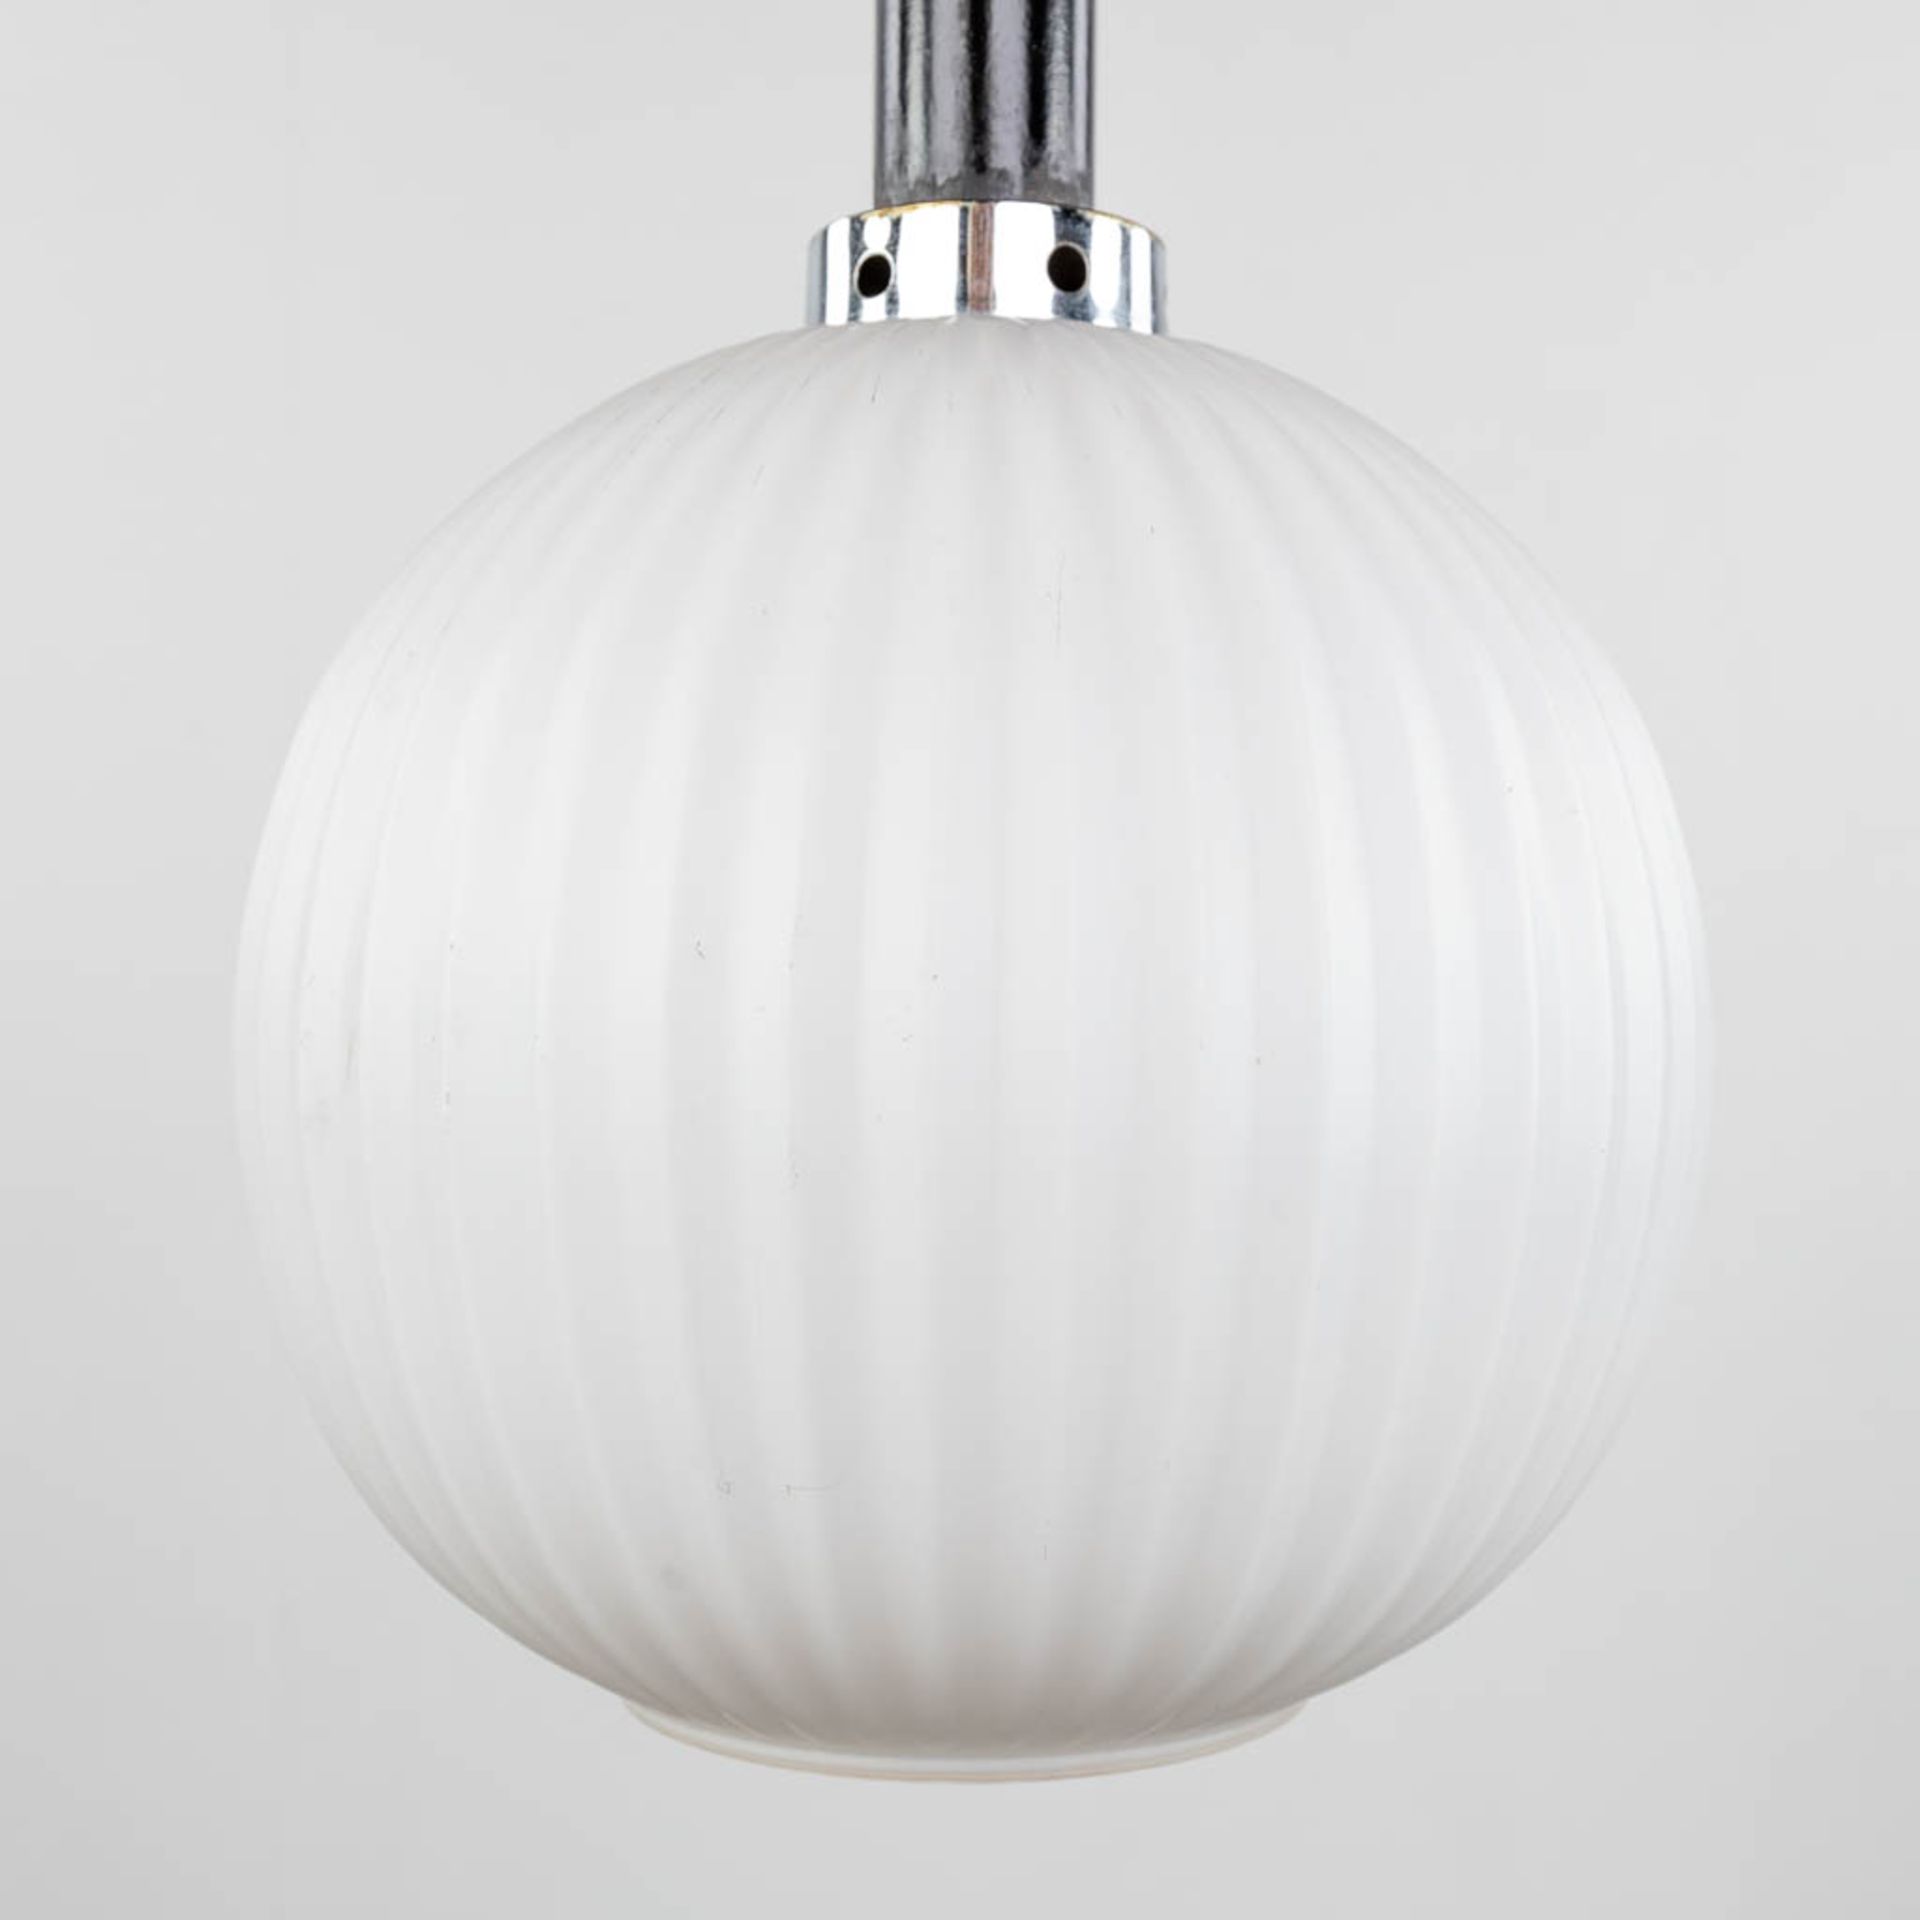 A suspension lamp, opaline glass and chromed metal. (H:40 x D:24 cm) - Image 5 of 7